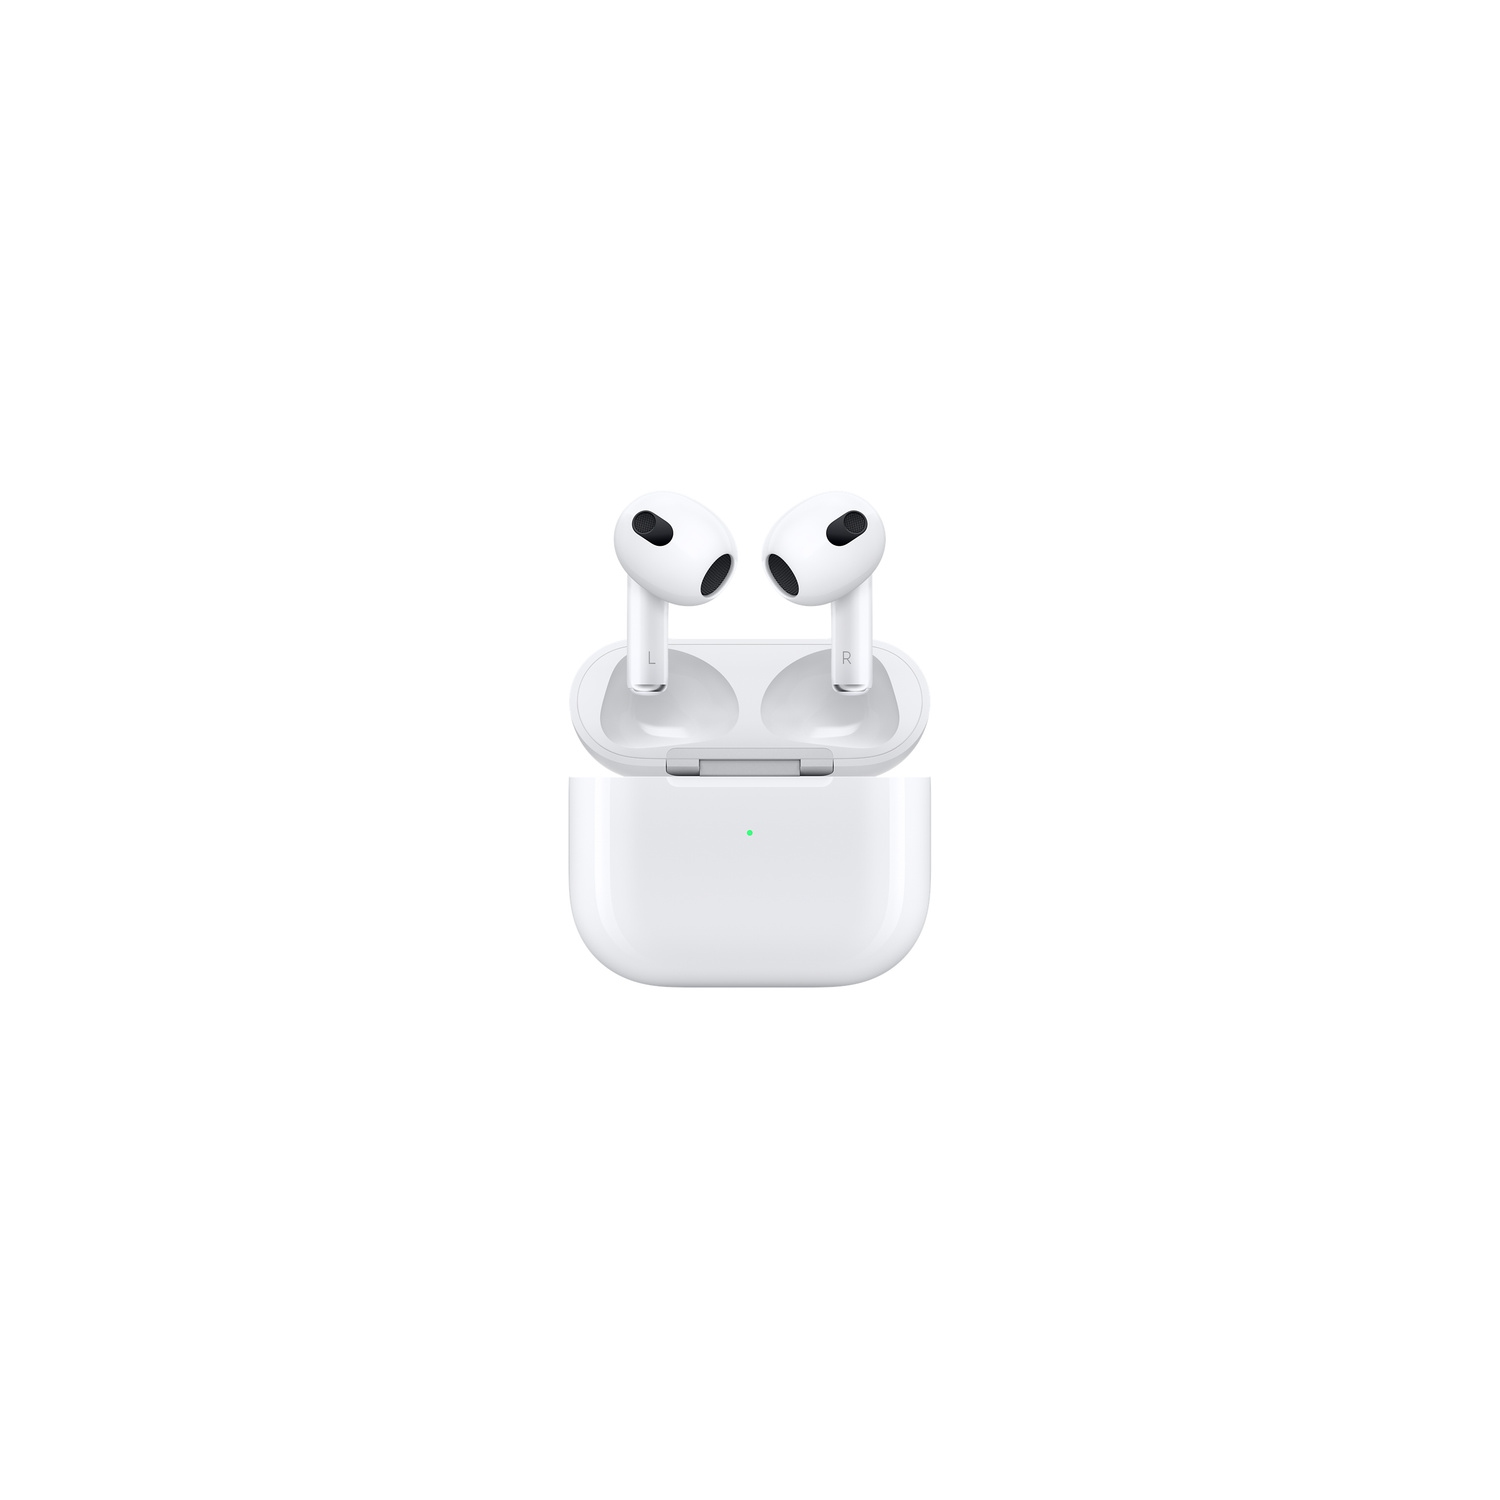 Apple AirPods (3rd generation) In-Ear True Wireless Earbuds with Lightning Charging Case - White - Brand NEW